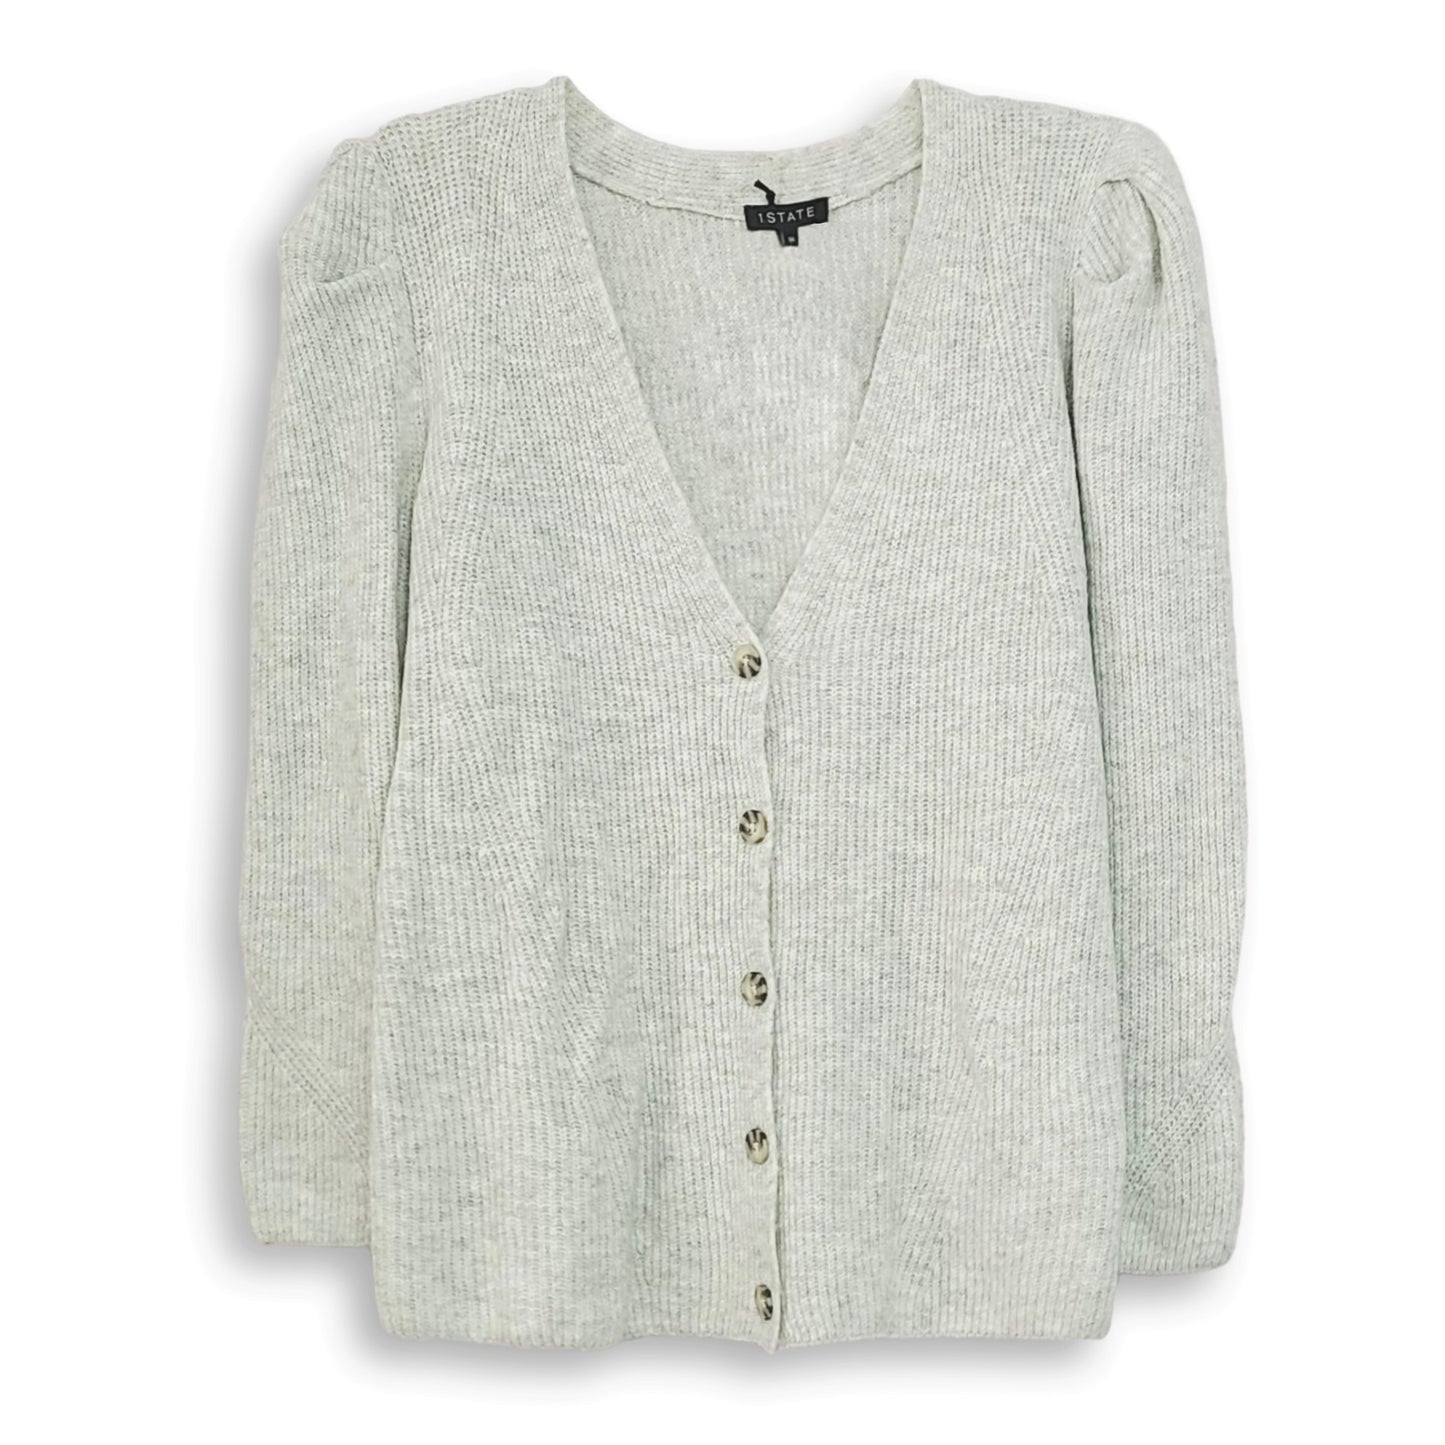 1.STATE Women's Plus Puff Long Sleeve Button Front Top Soft Knit Cardigan